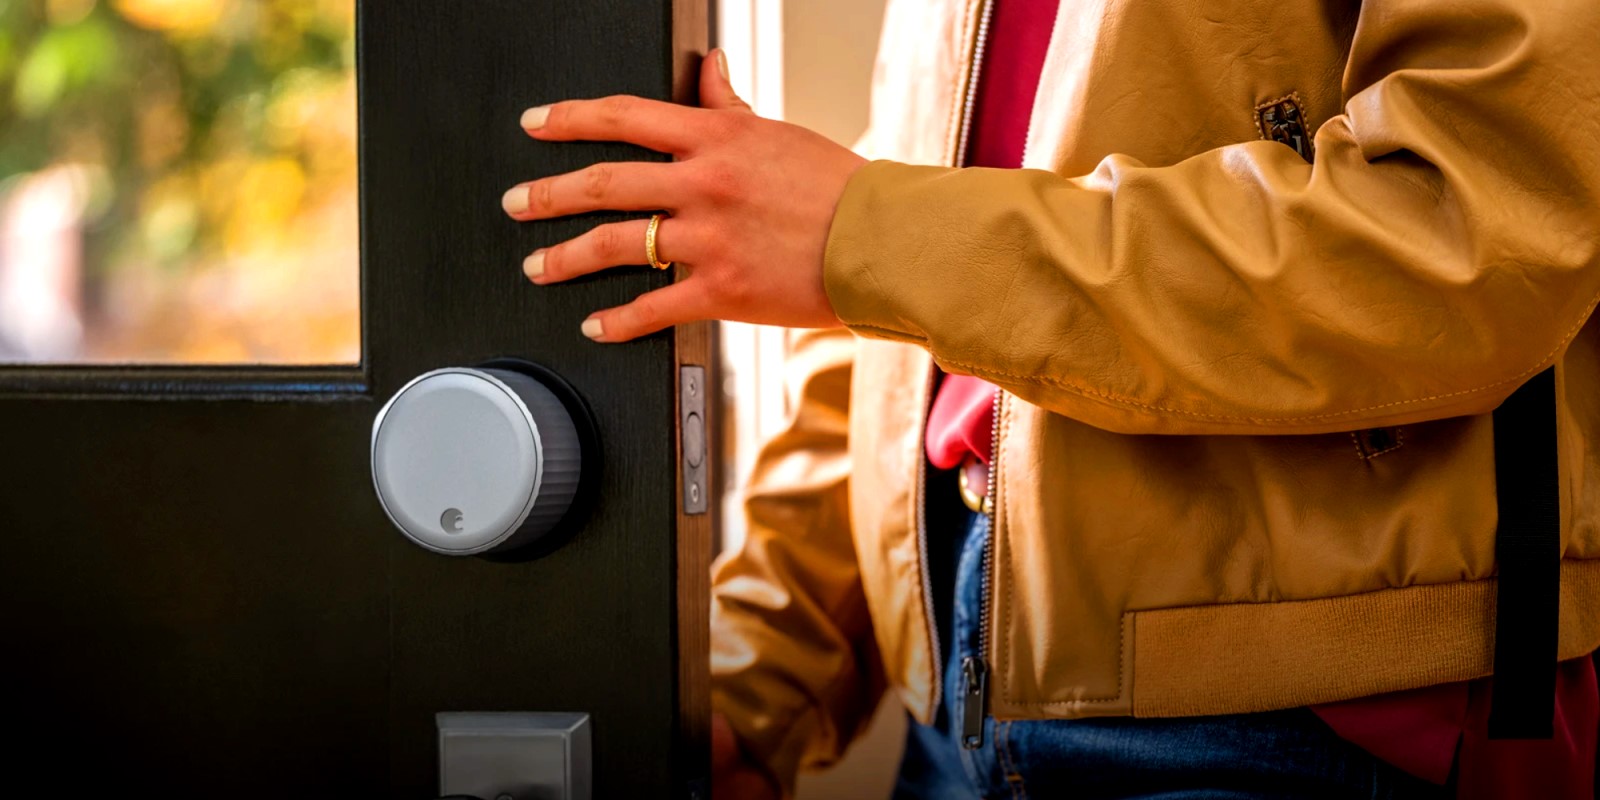 How to Operate August Smart Lock